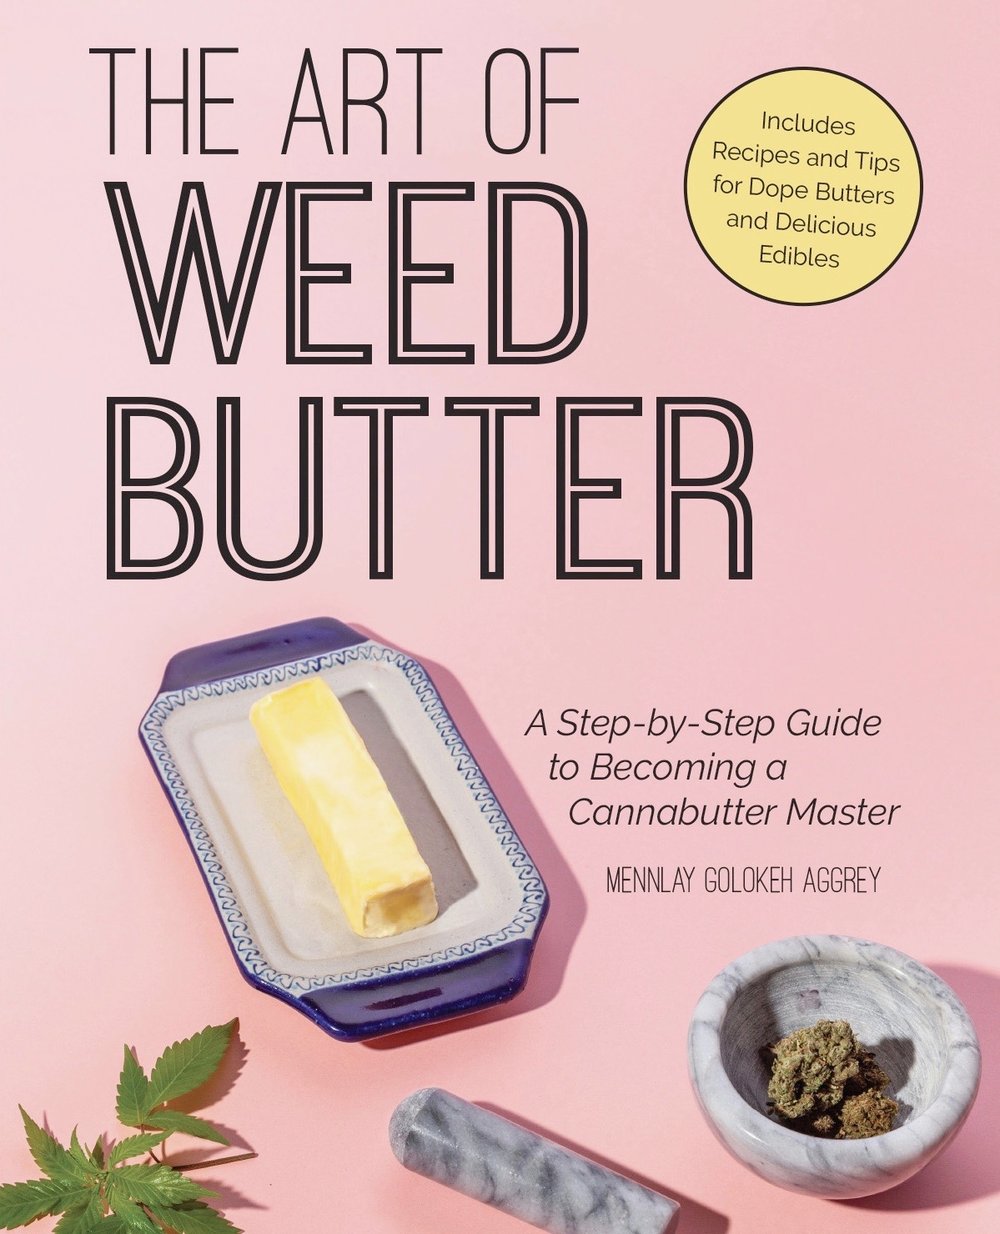 The Art of Weed Butter // A Step-By-Step Guide to Becoming a Cannabutter Master